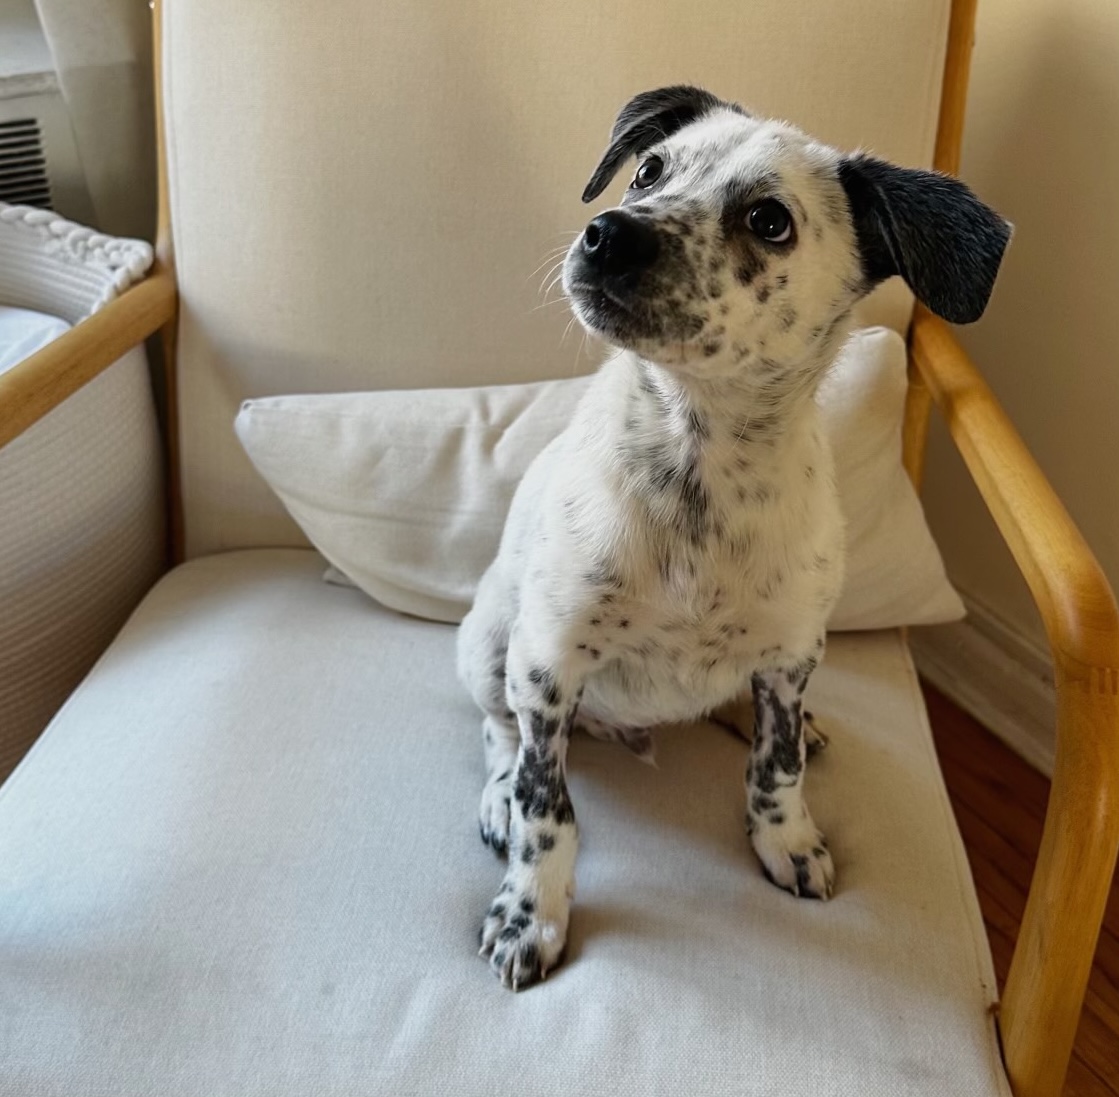 A small black and white puppy sitting on a chair.